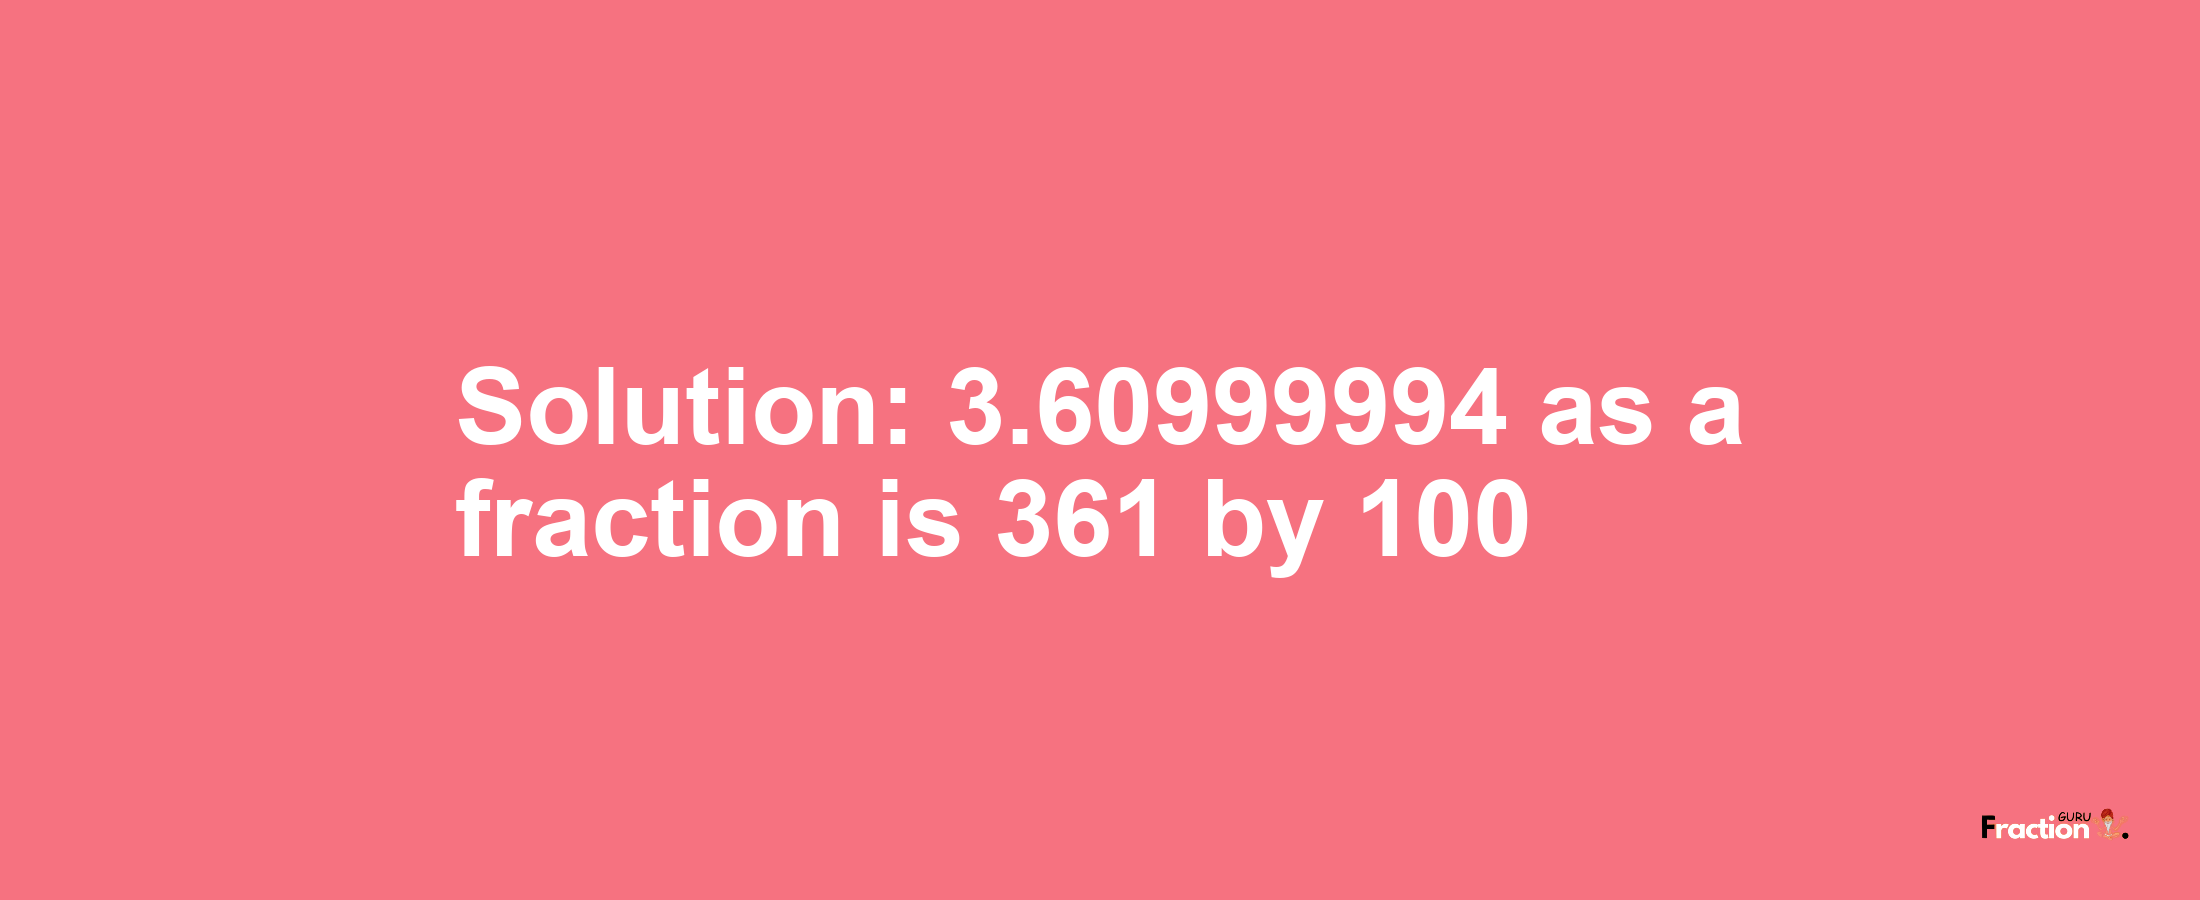 Solution:3.60999994 as a fraction is 361/100